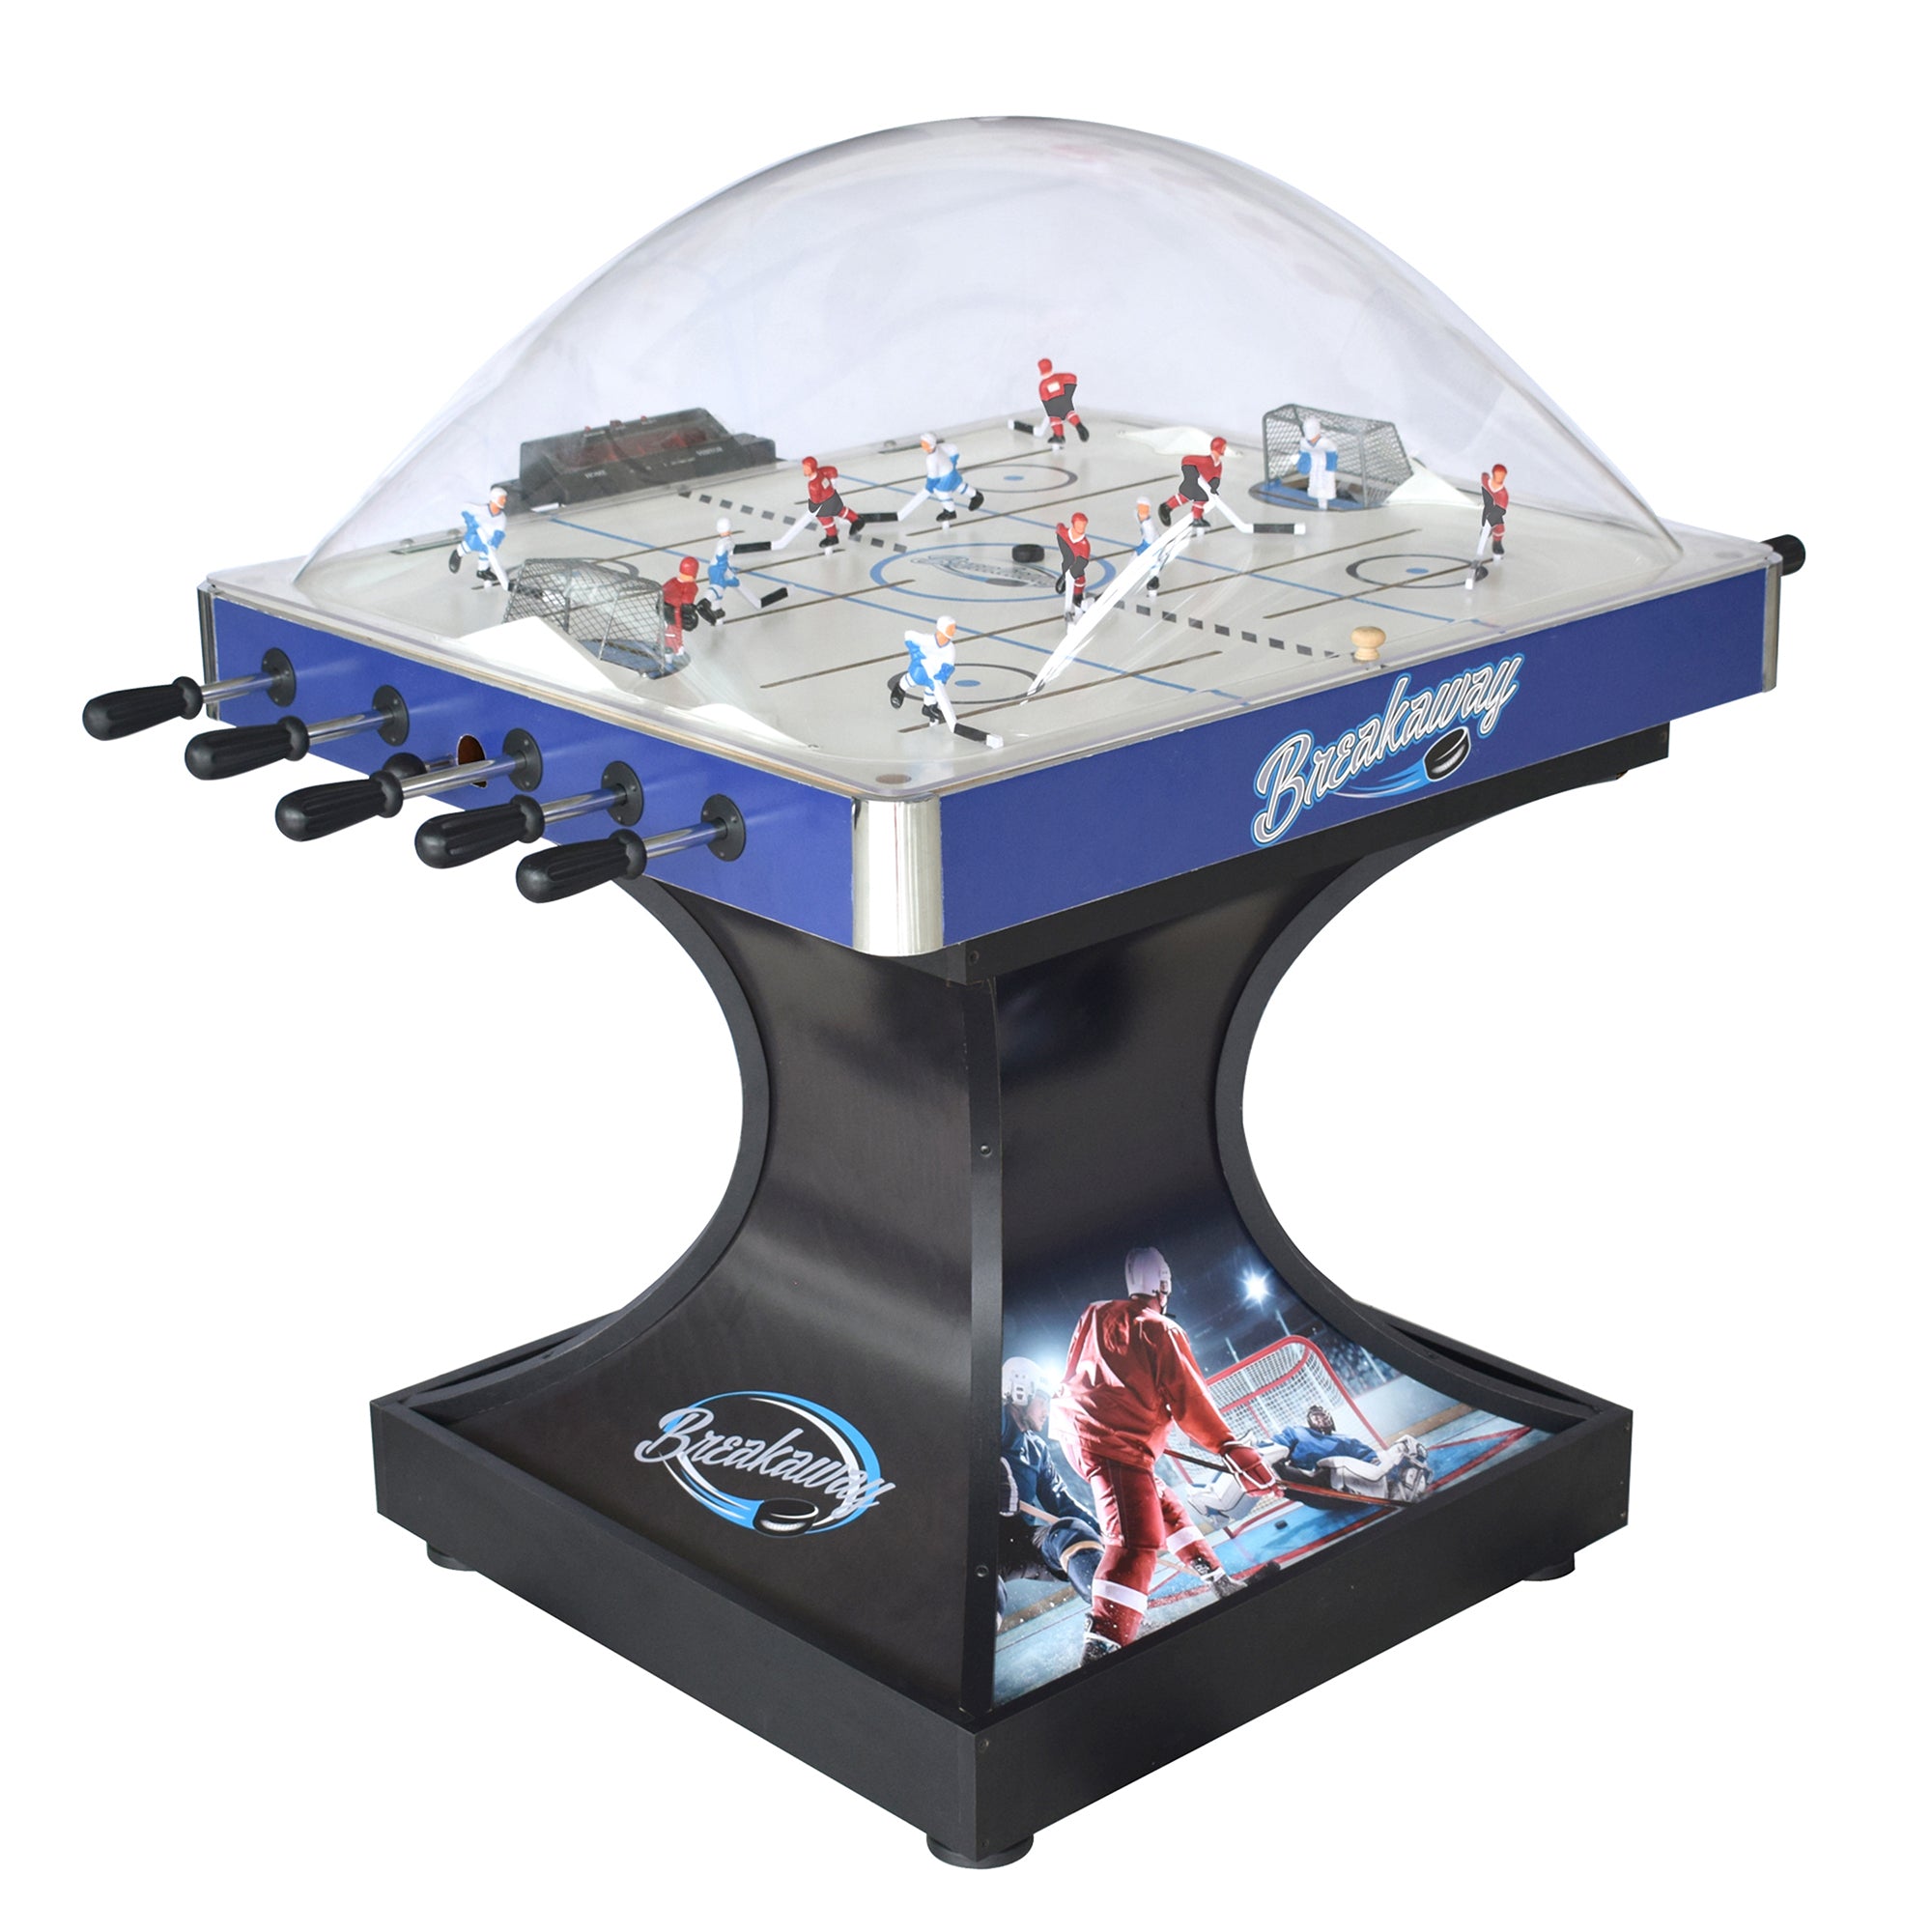 Breakaway 41-in Dome Hockey Table with LED Scoring - BG5003